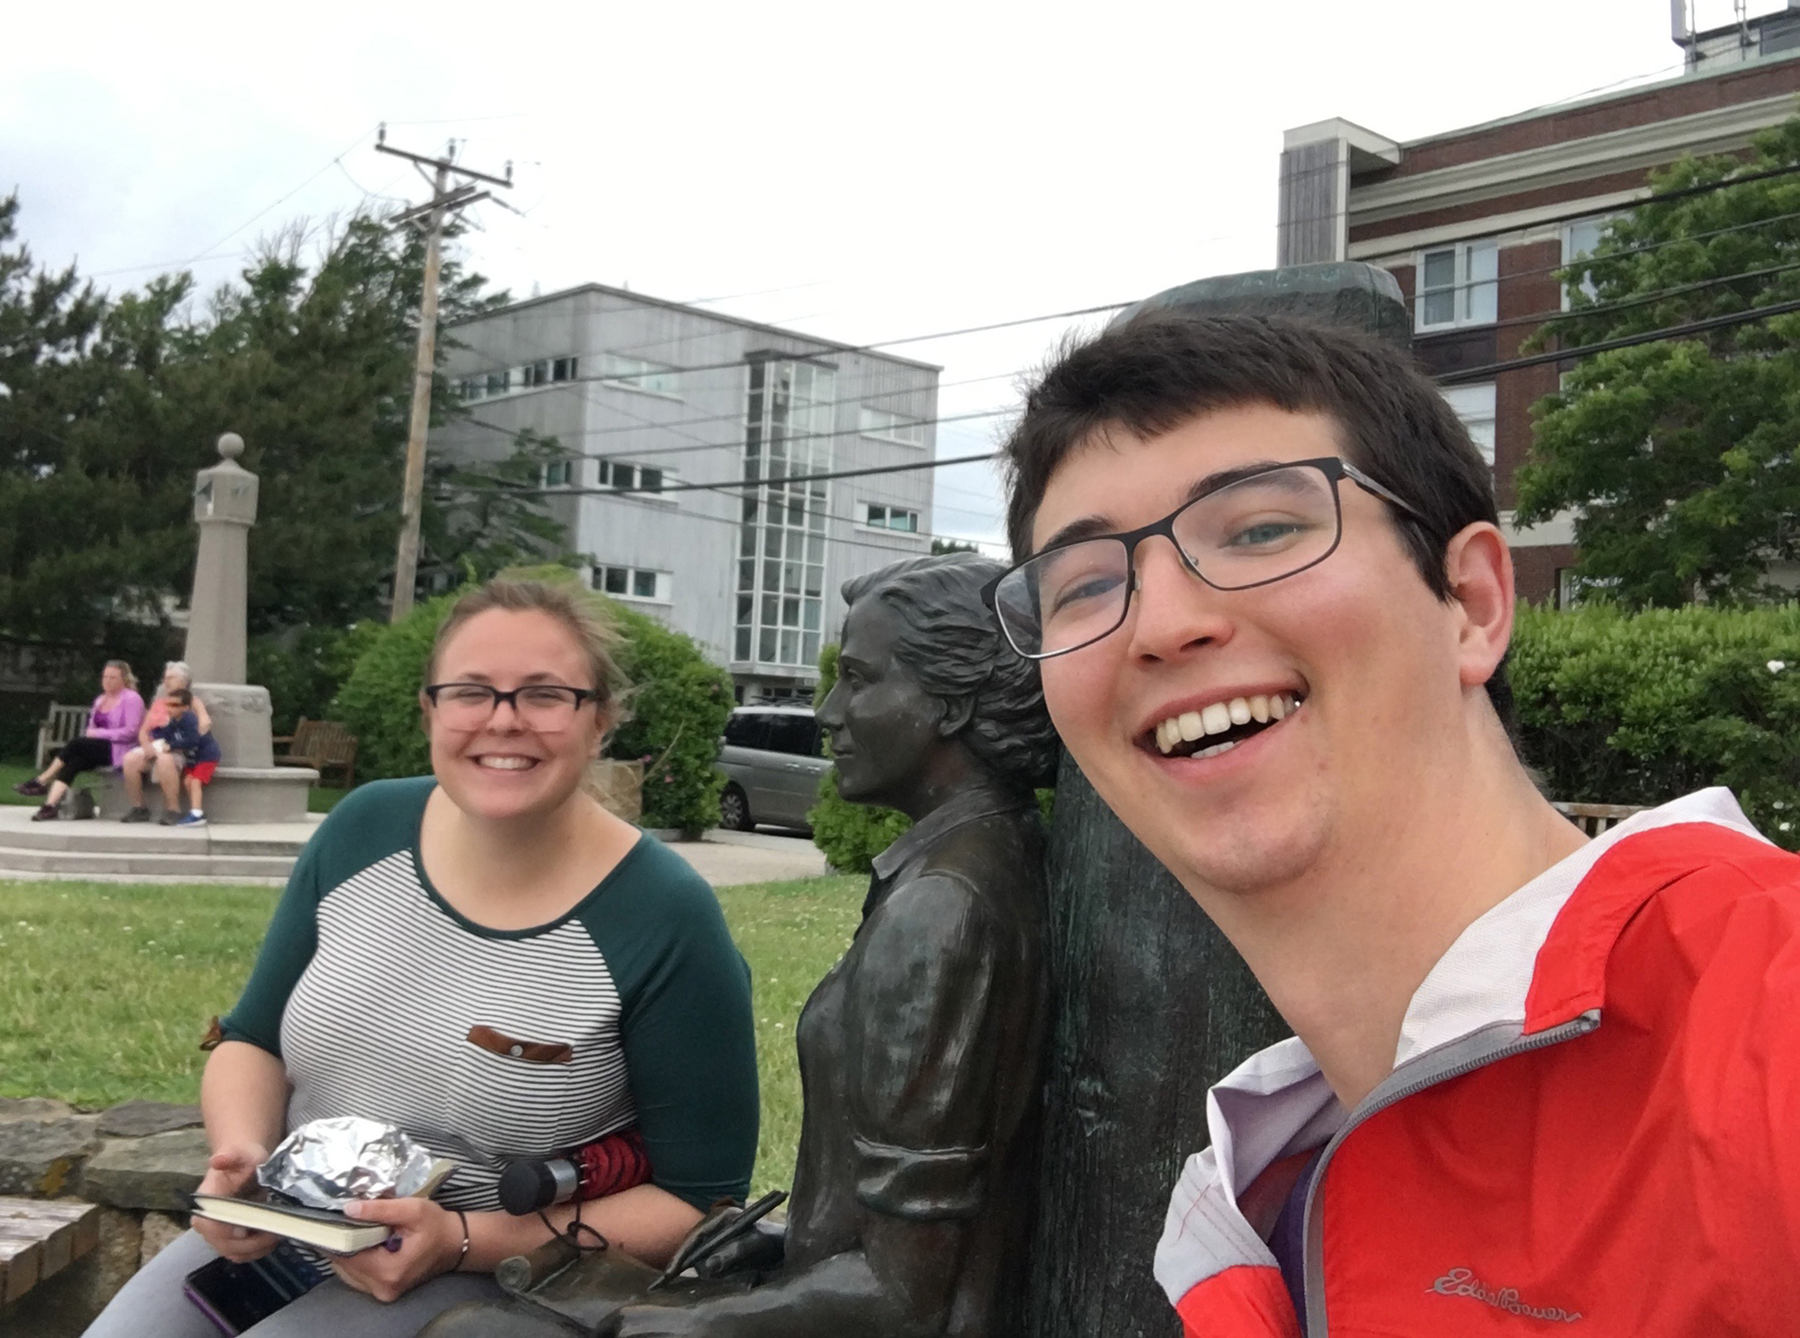 Katelyn Mika and Alexander Okamoto take a lunch break by the Rachel Carson statue in MBL’s Waterfront Park. Credit: Alexander Okamoto